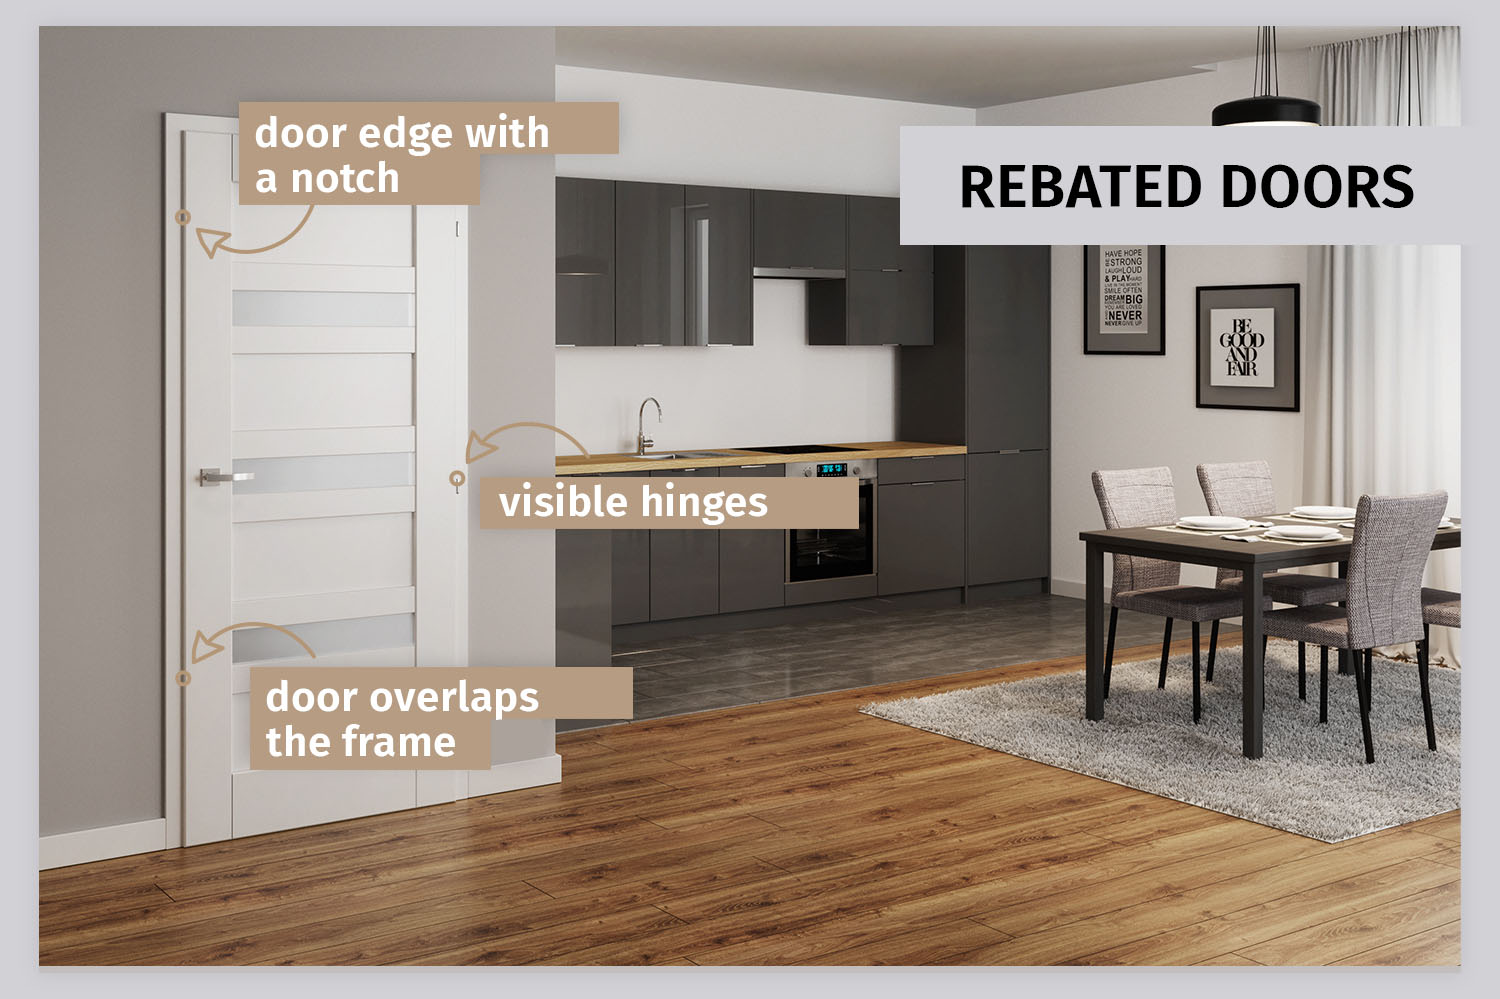 Characteristics of rebated doors. The photo shows Lukka leaves (model 5) by Classen